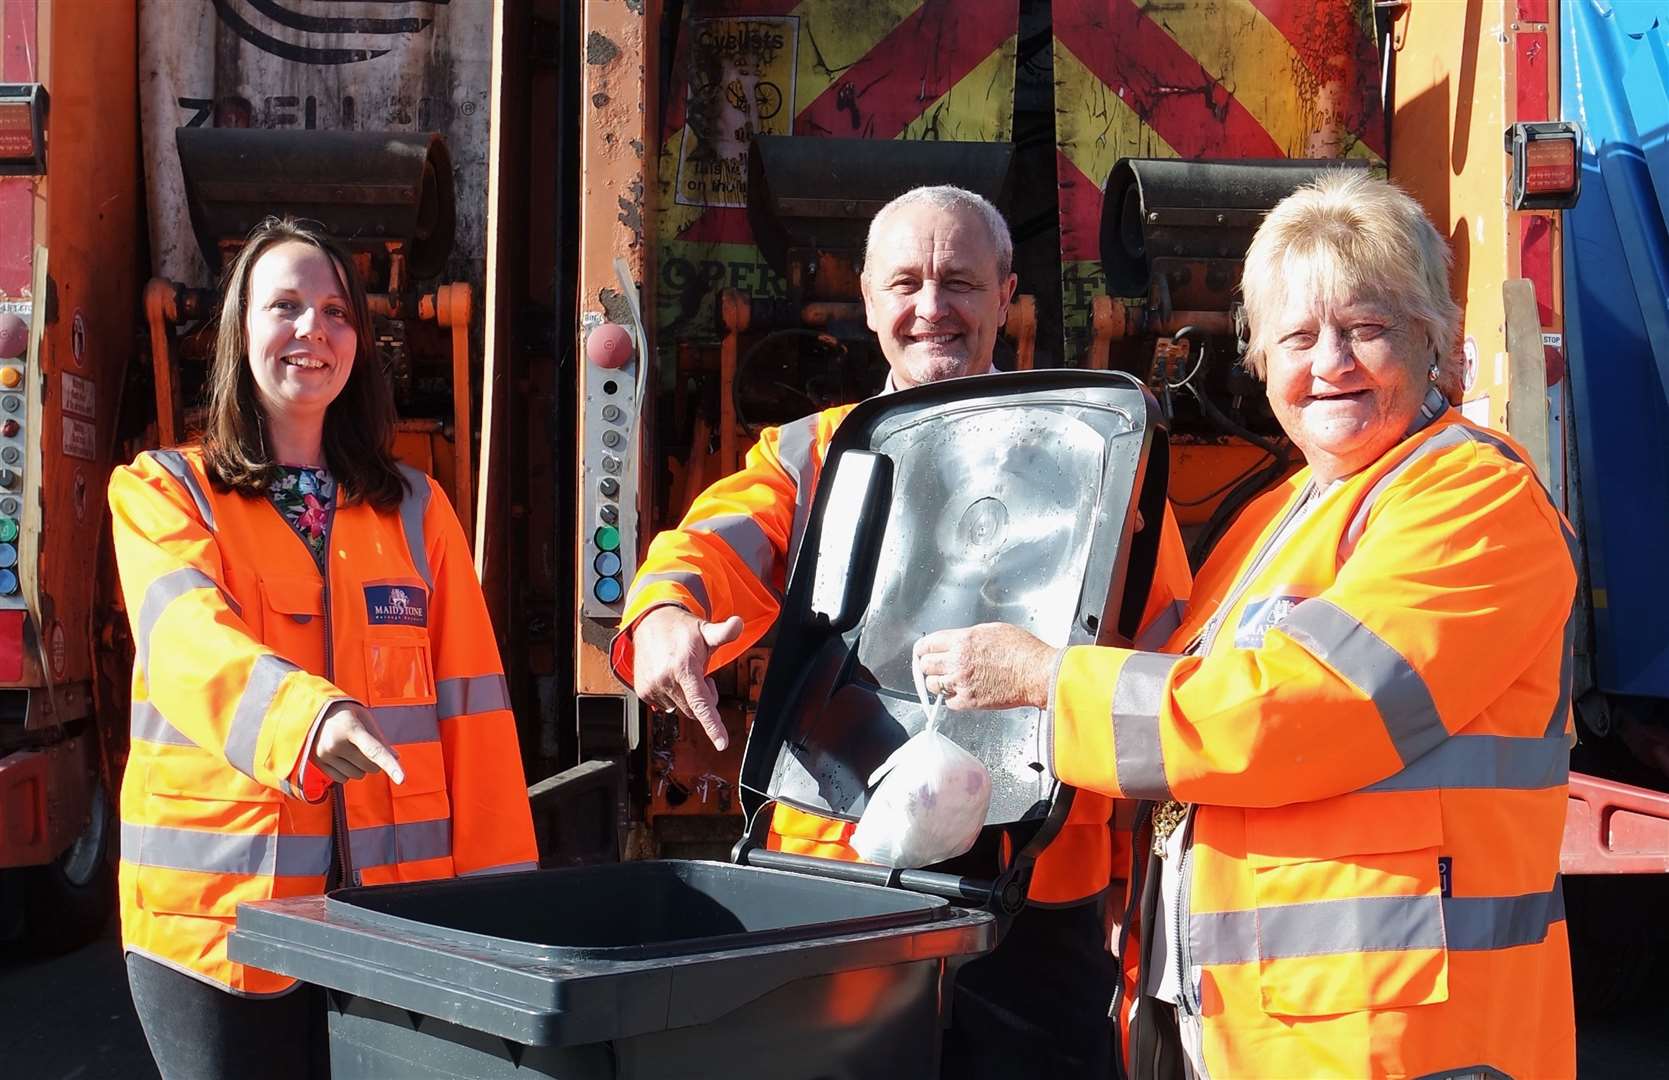 Elizabeth Duncan, MBC Waste Strategy Officer; Graham Gosden, MBC Waste Manager and Marion Ring, Mayor of Maidstone launching the Bin The Nappy campaign at the Maidstone Borough Council waste depot